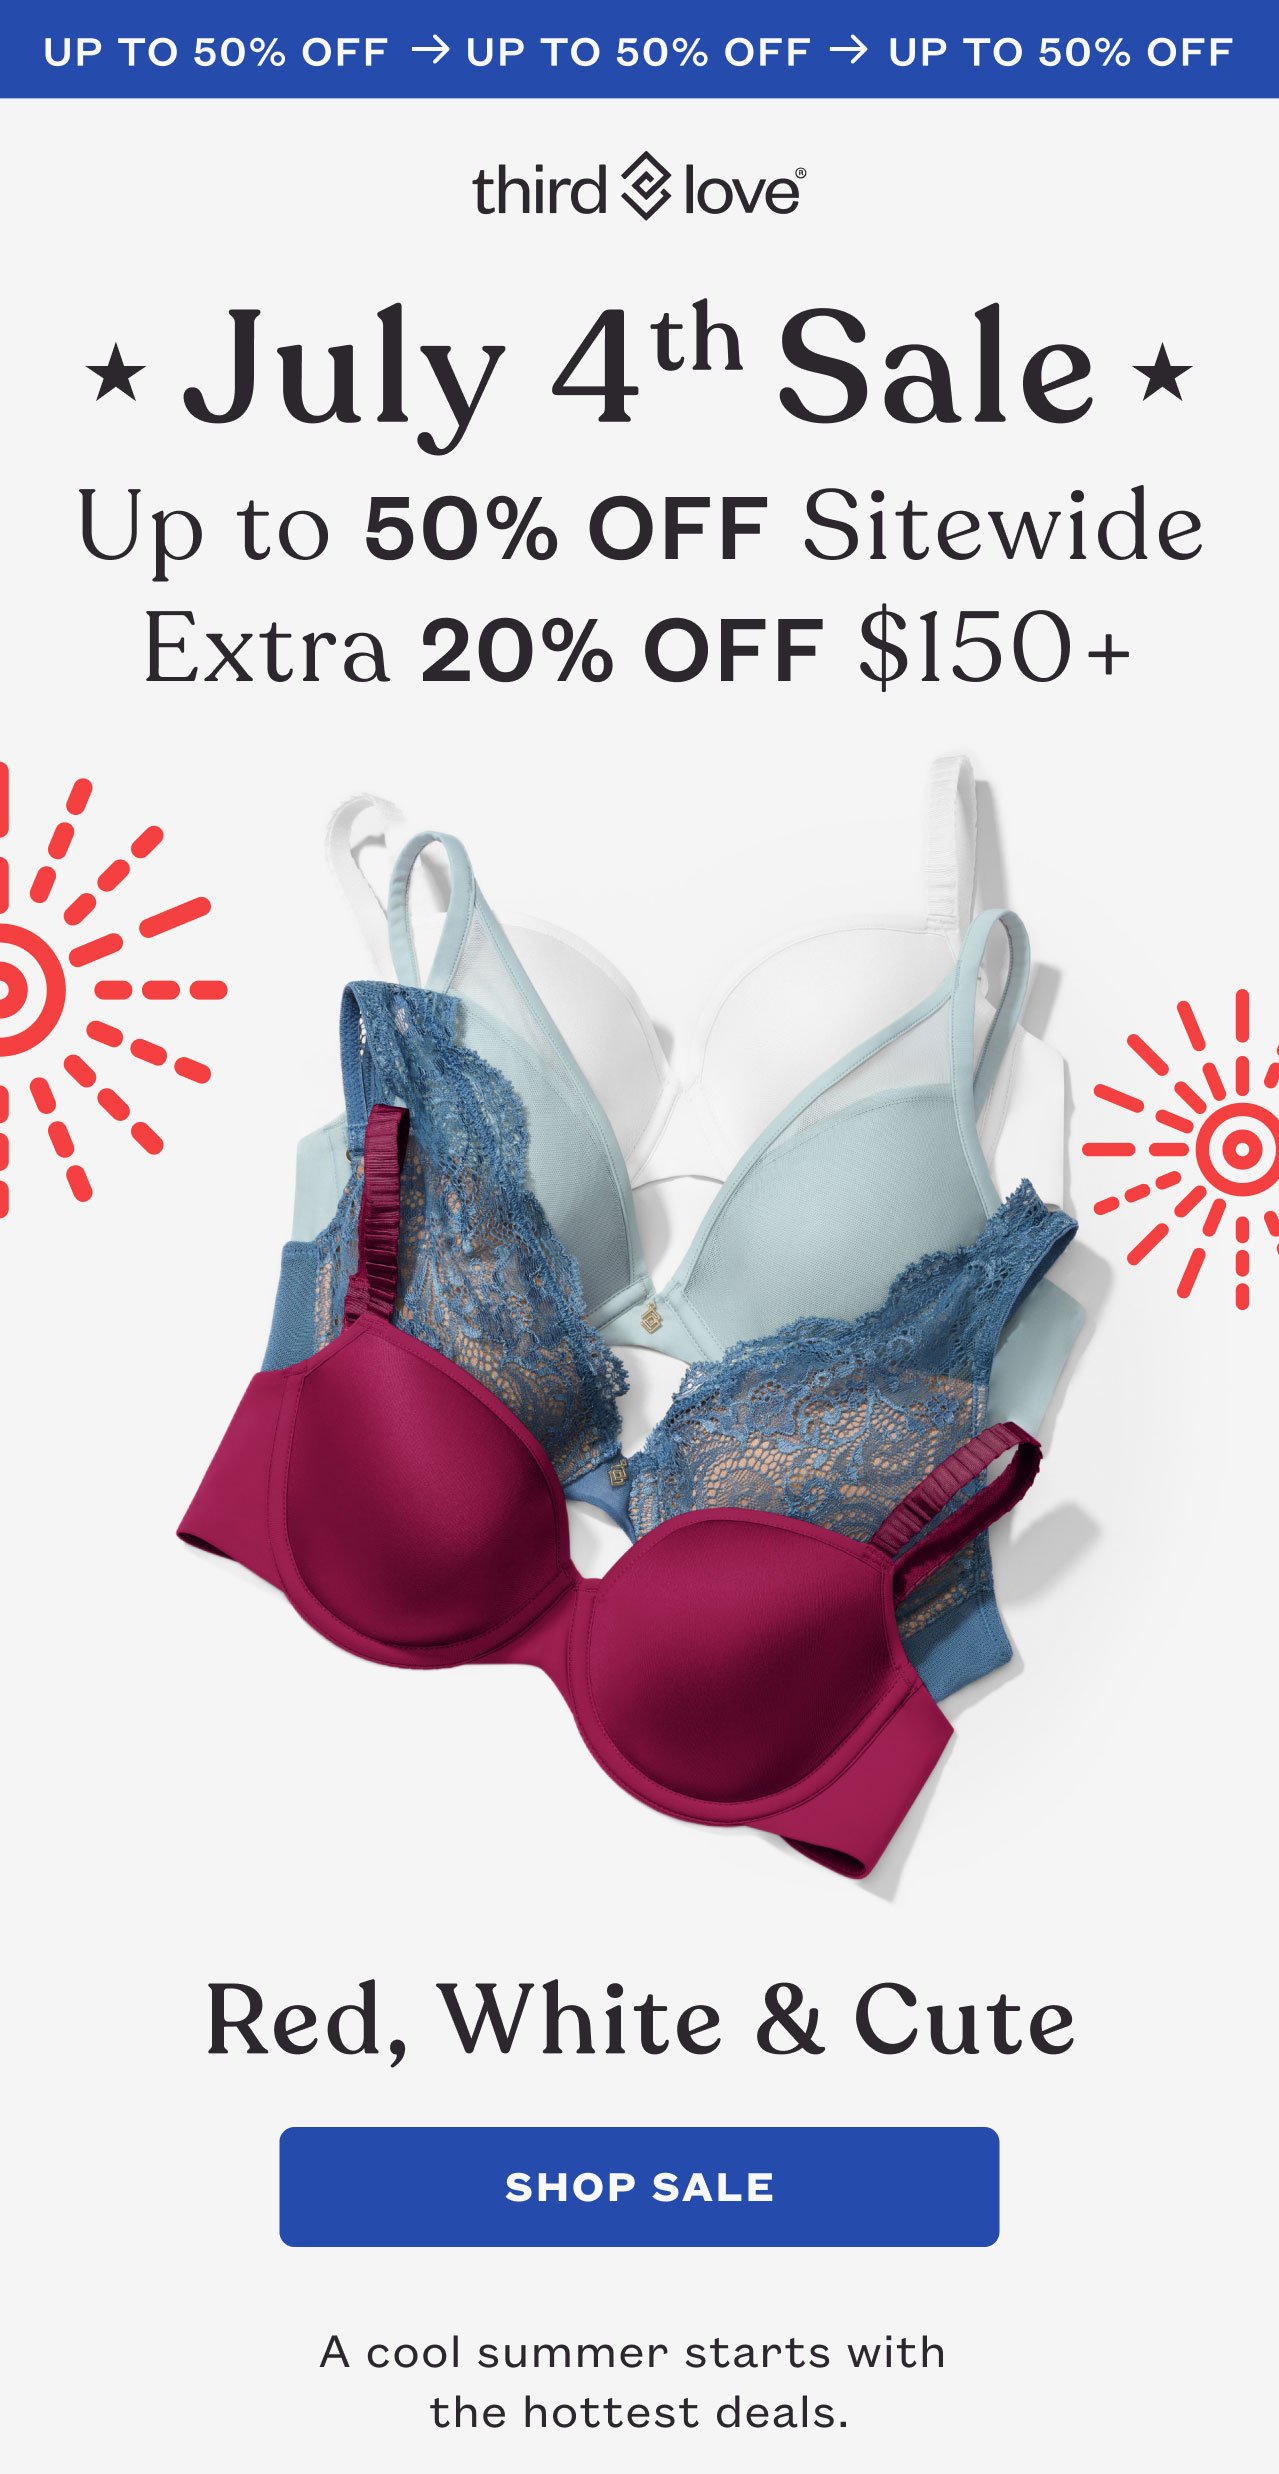 🎂 Birthday Deal: Get 2 Bestselling Bras for $99 at ThirdLove! 🎉 - Third  Love